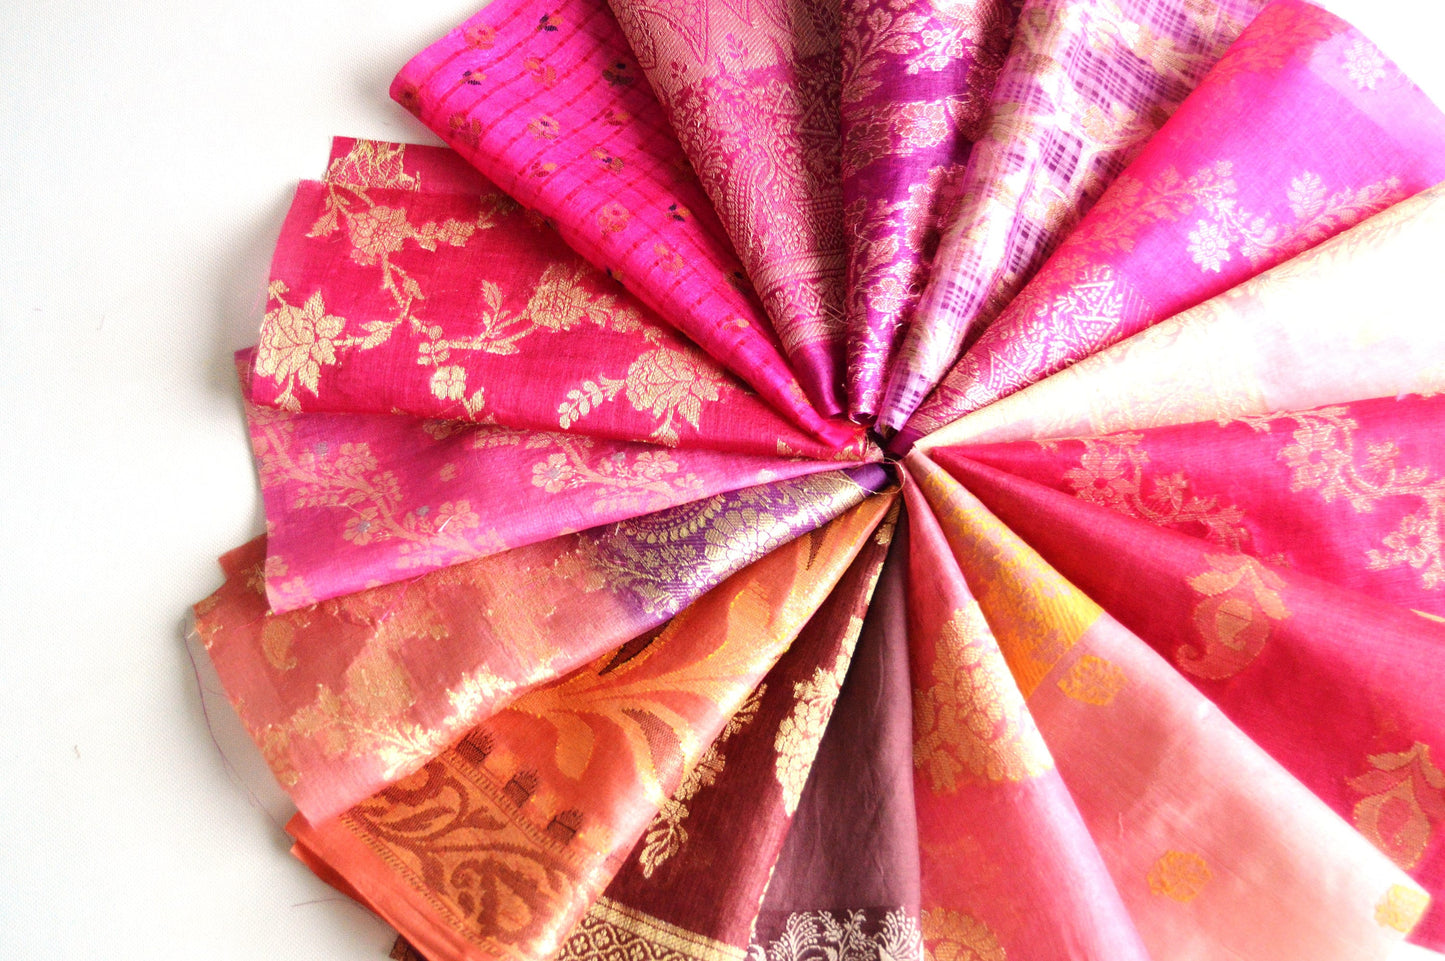 10 Inch x 16 Pieces Pink Recycled Vintage Silk Sari Scraps Brocade Fabric Card Making Collage Mixed Media Textile Art Junk Journals